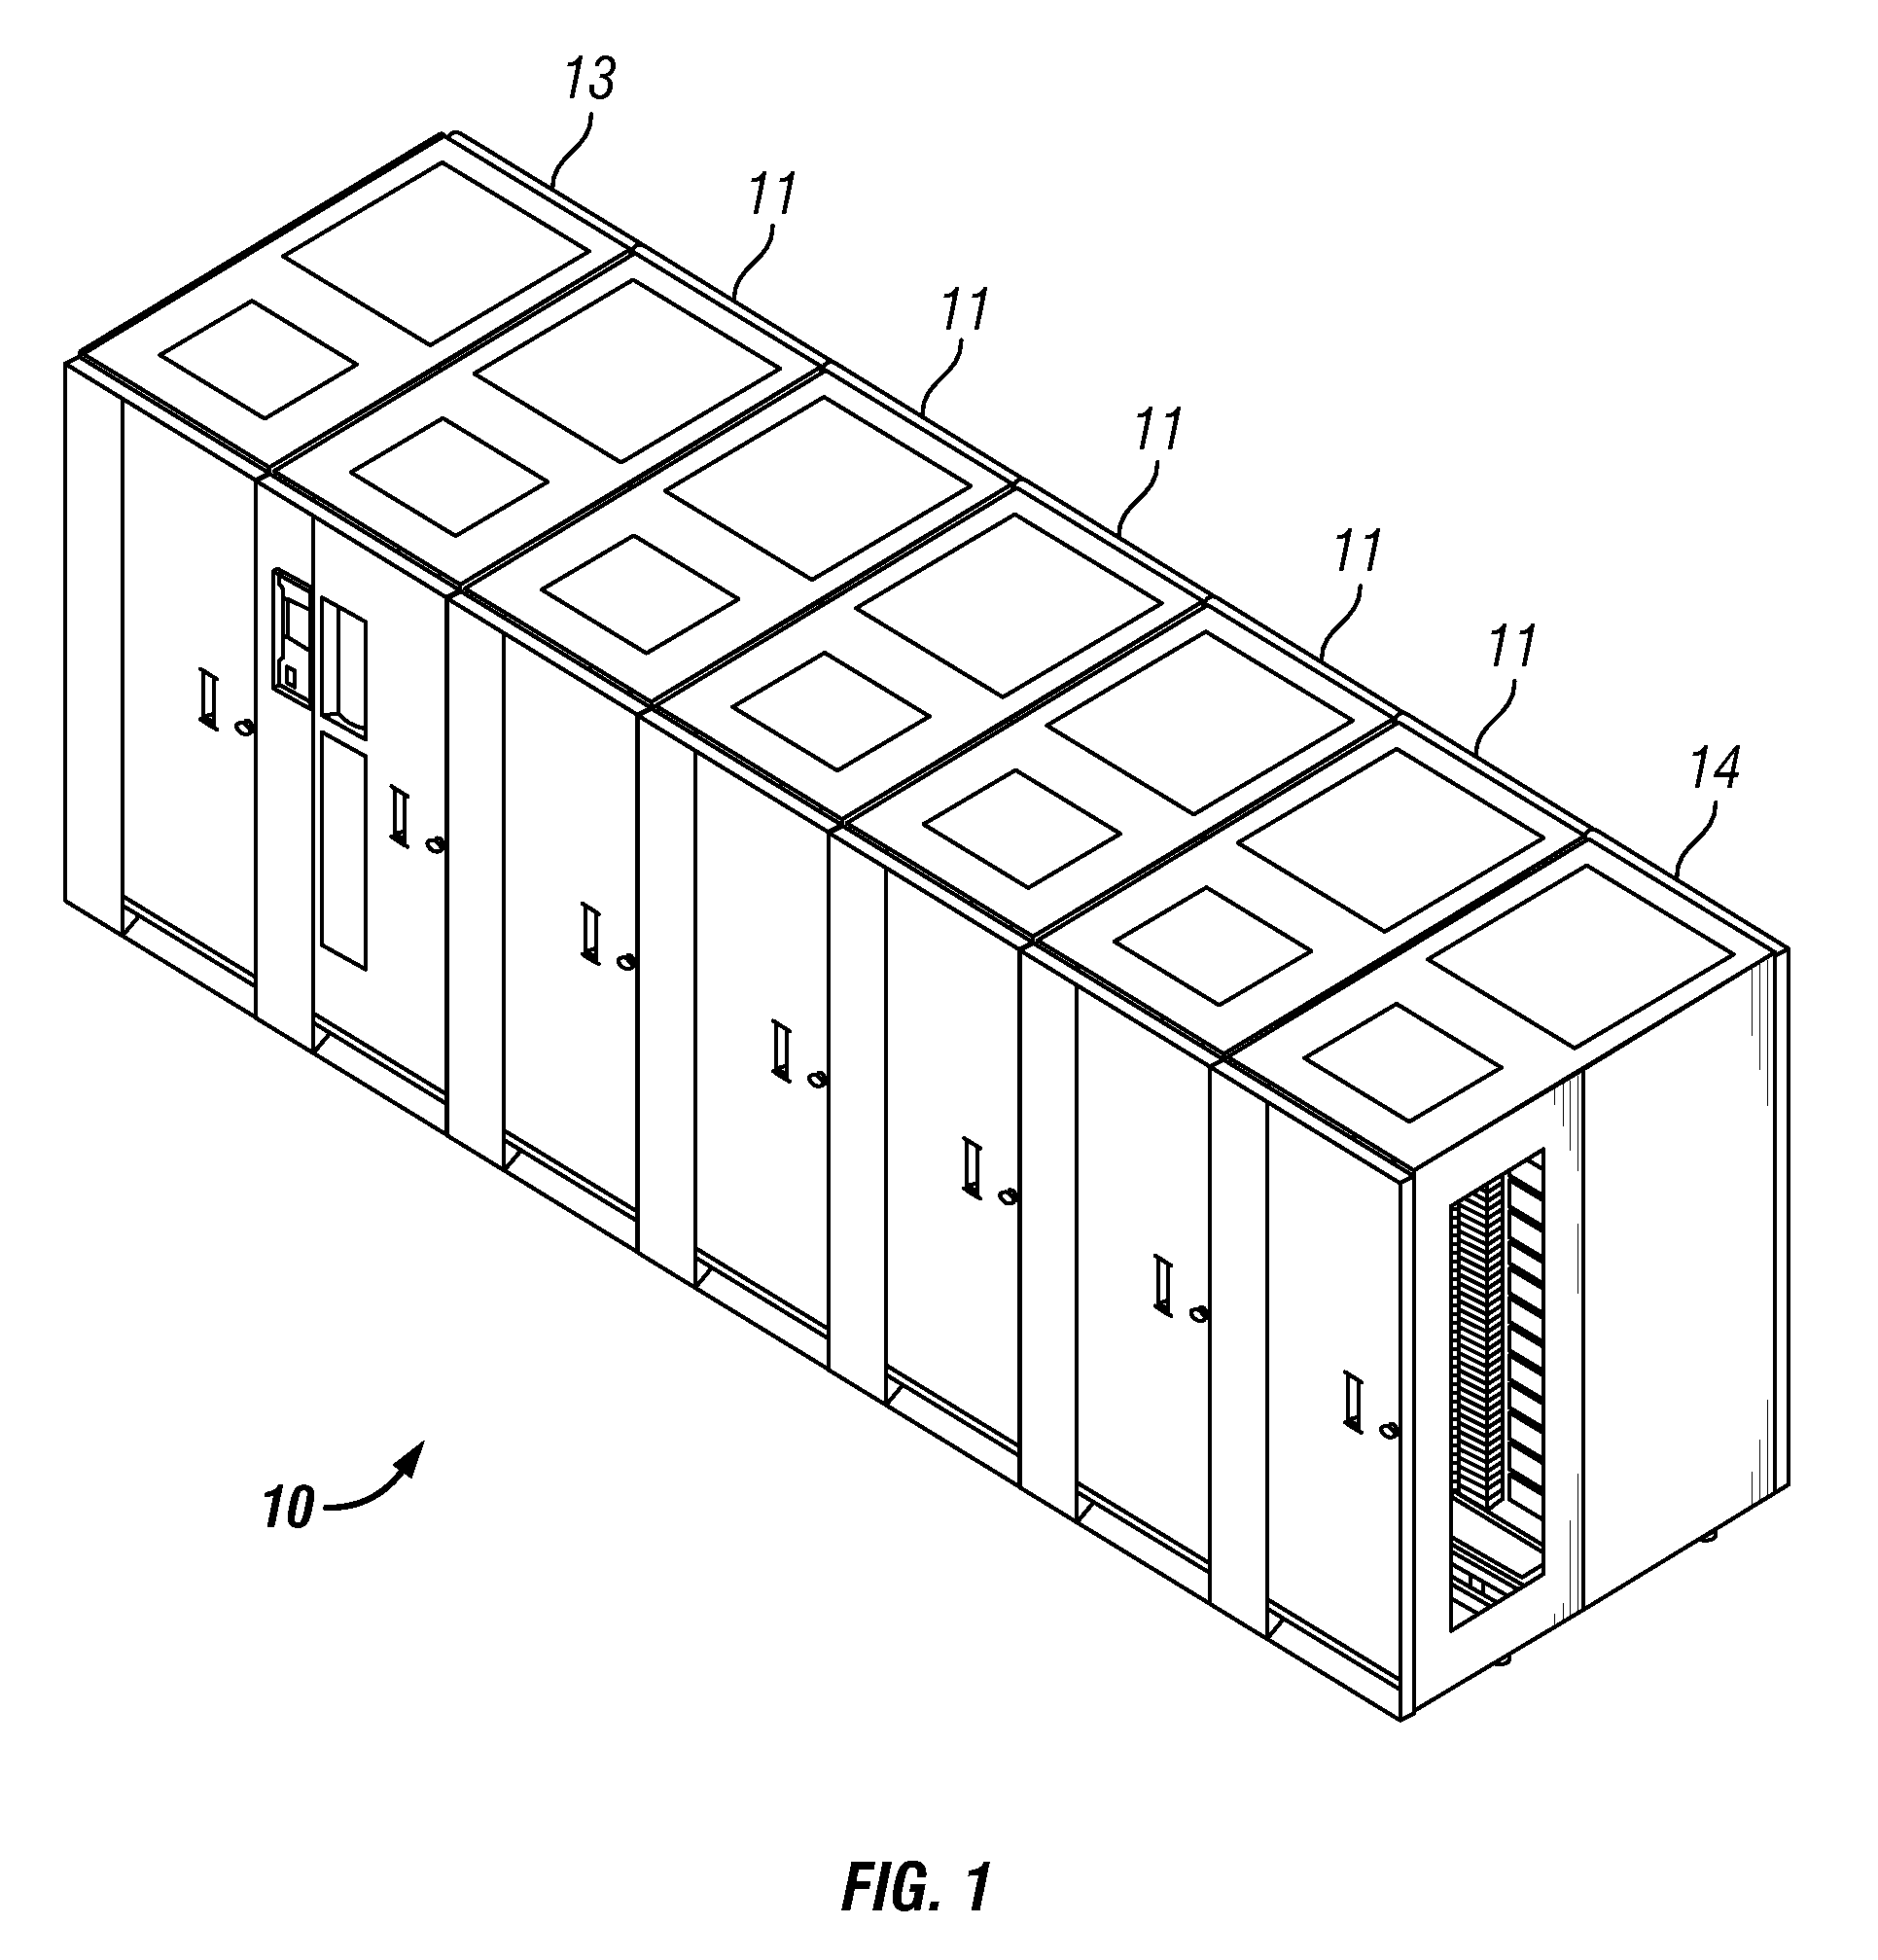 Placement of data storage cartridges in single cartridge slots and in multi-cartridge deep slot cells of an automated data storage library